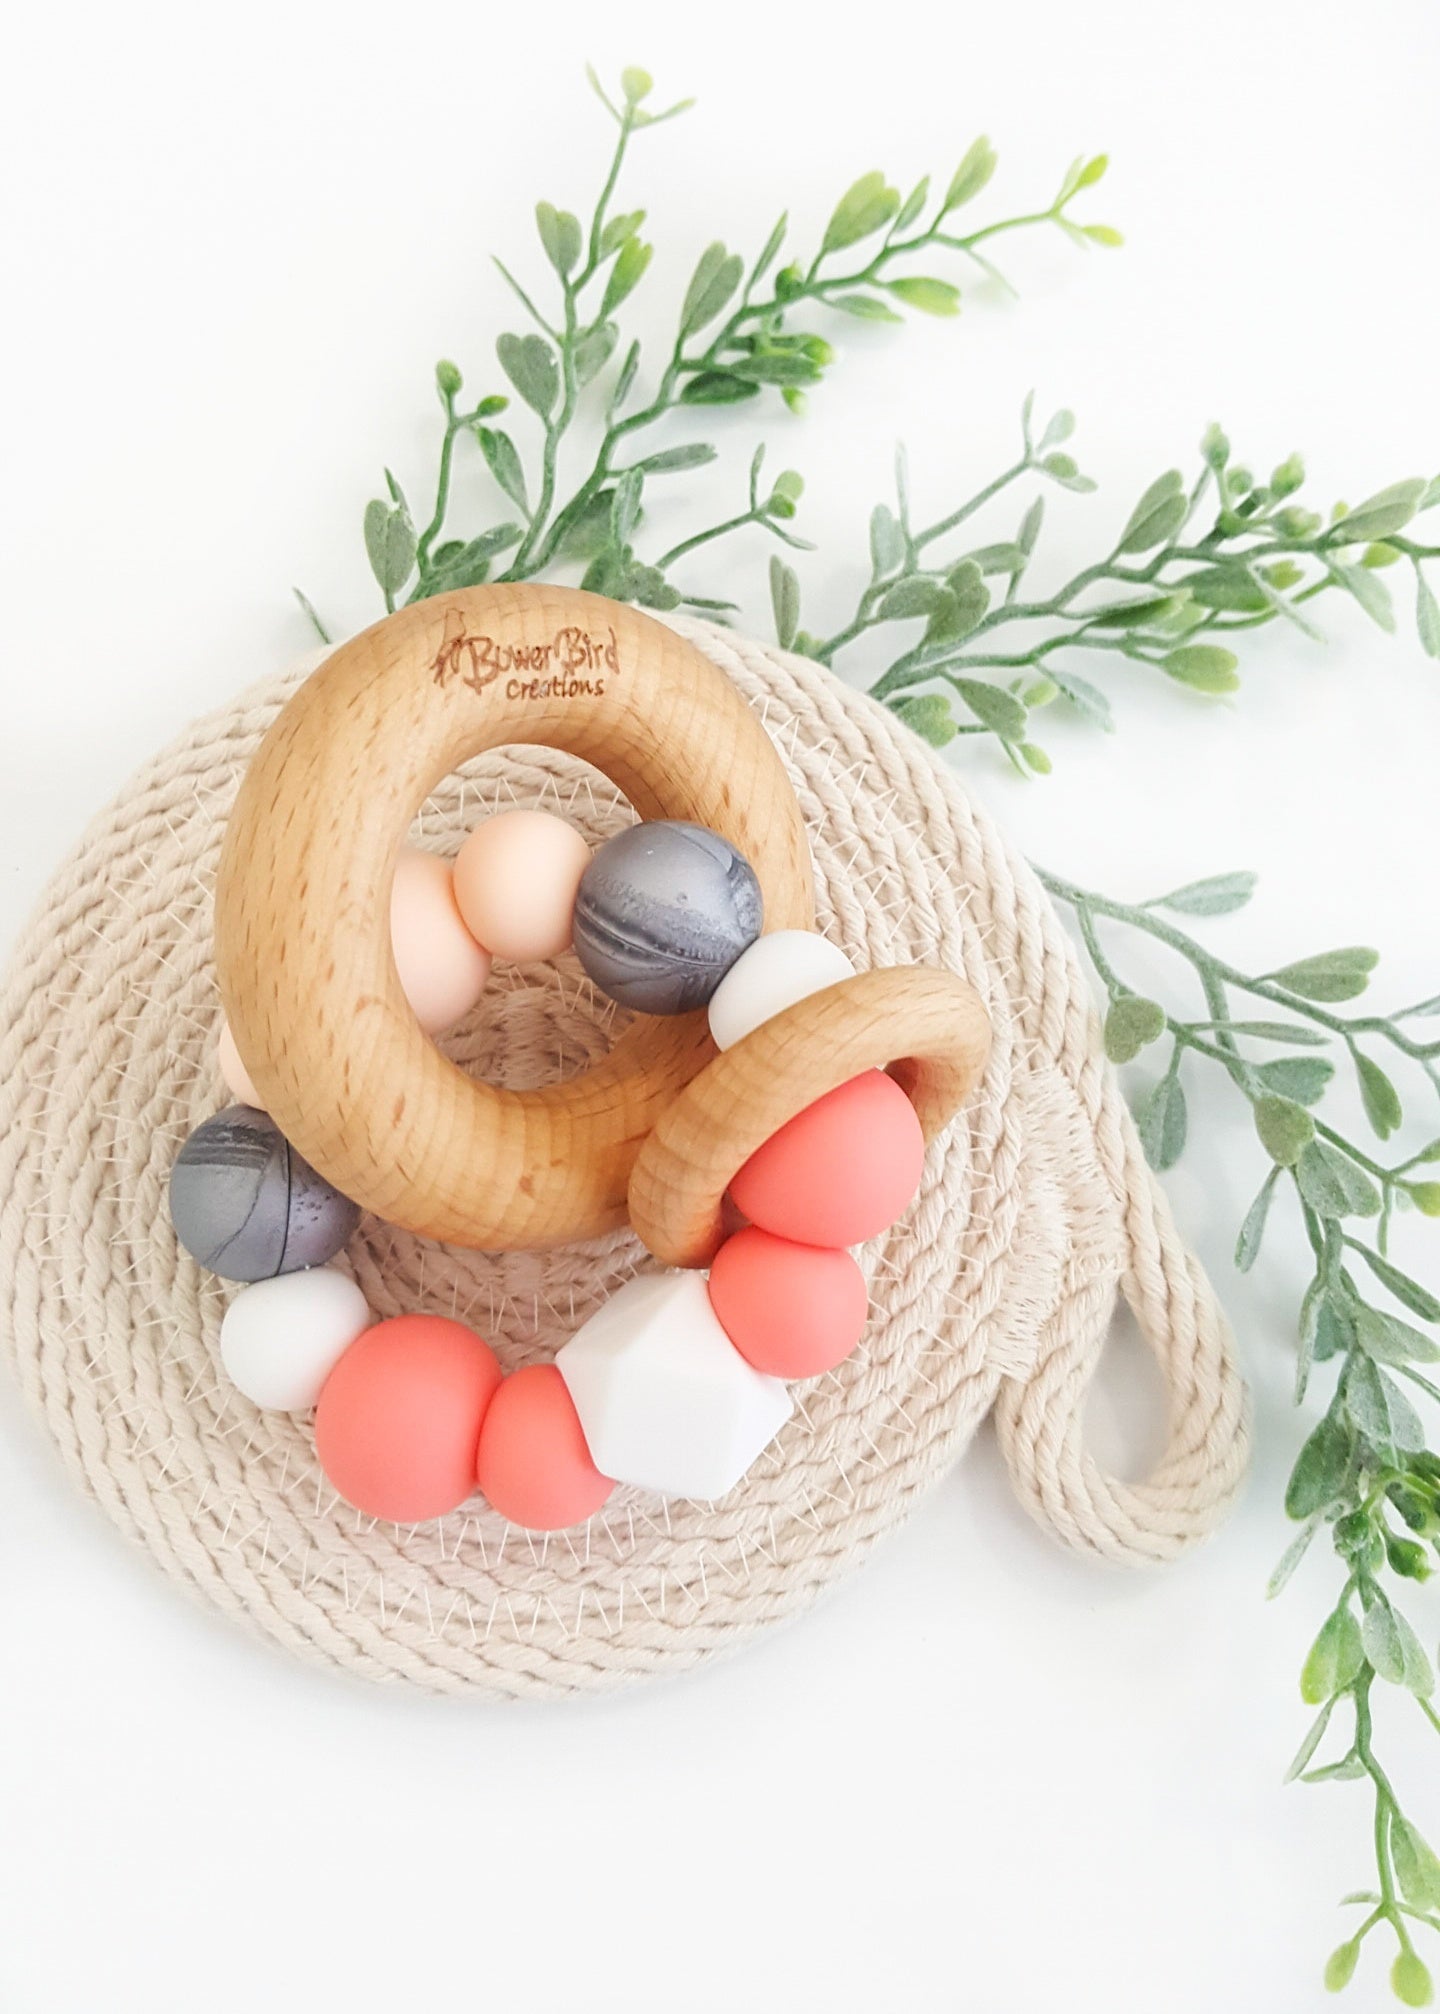 Made from gorgeous Beech timber and soft Bpa-free silicone, these teething toys have been designed to soothe sore teething gums and encourage healthy fine motor skills development and brain function - Eclipse Teething Toy - Bowerbird Creations